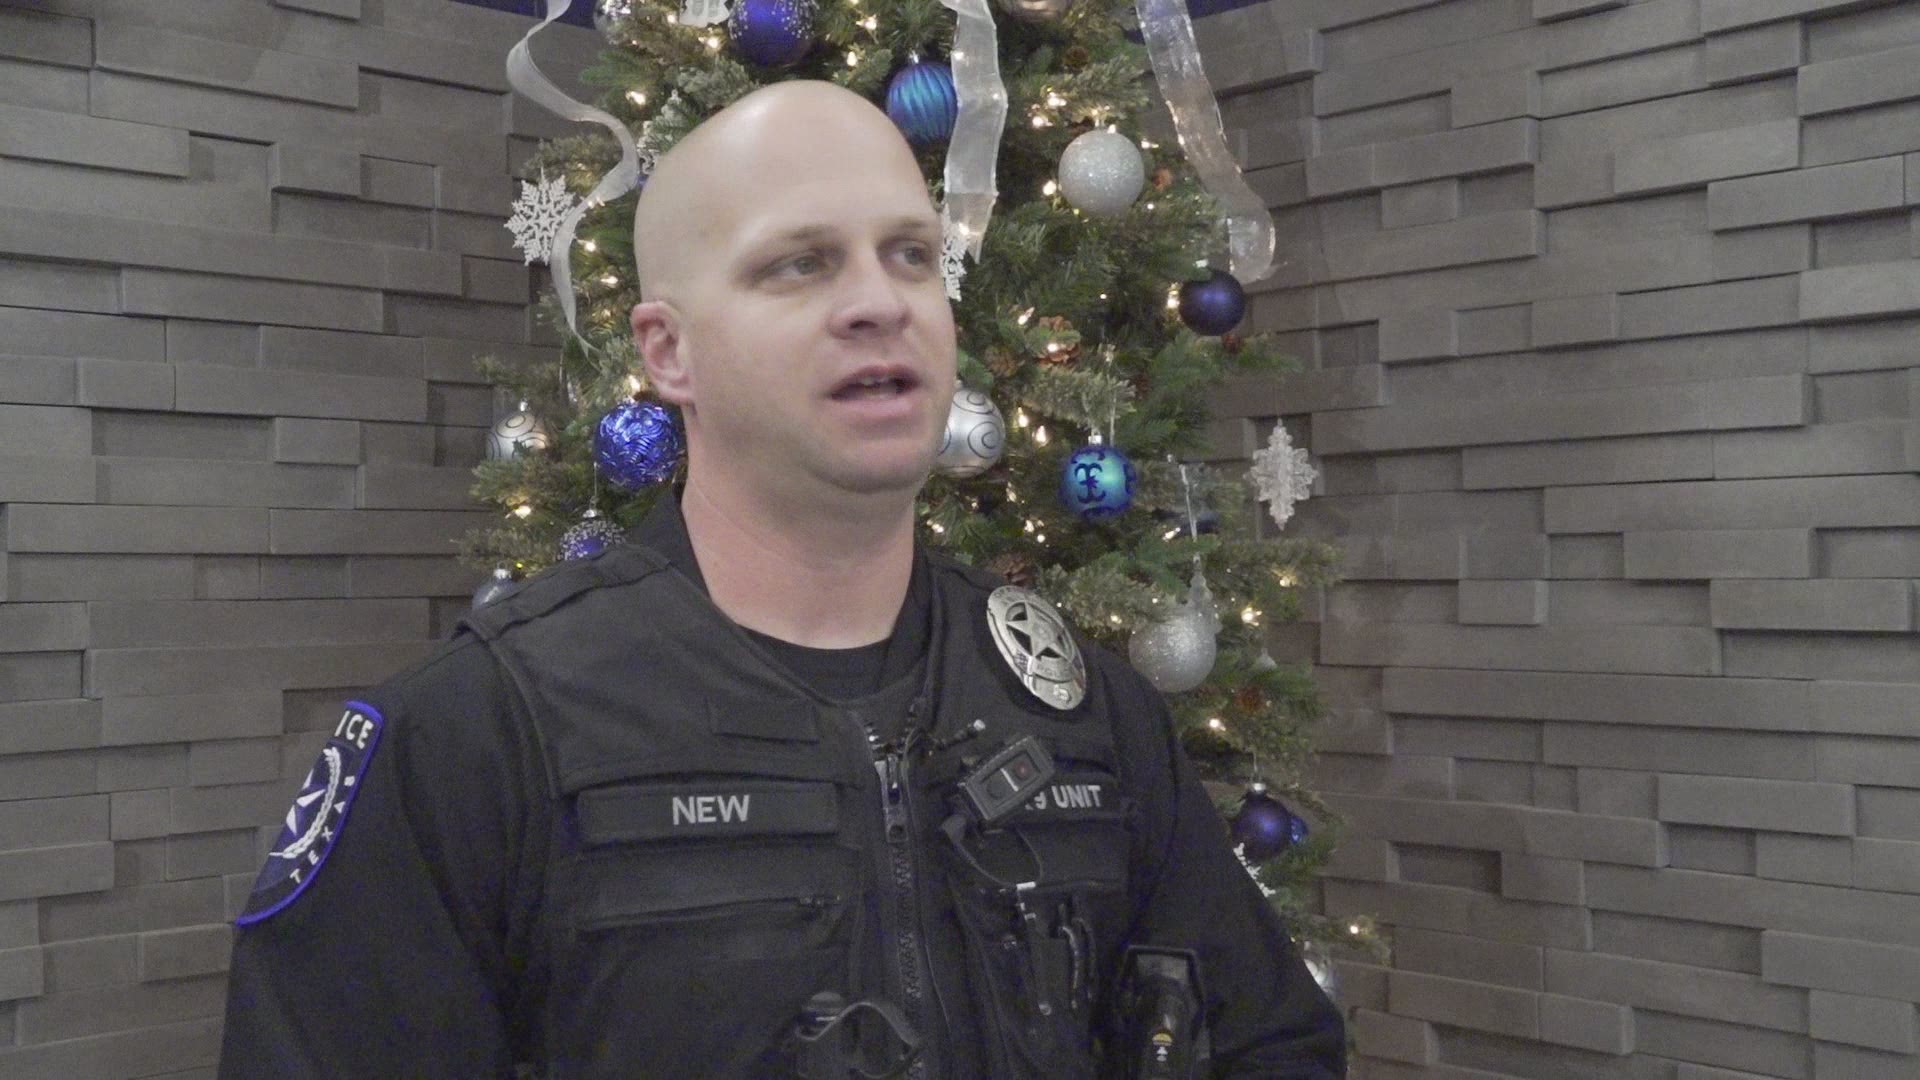 The Abilene Police Department is partnering with the community to give back to 100 at-risk students this Christmas